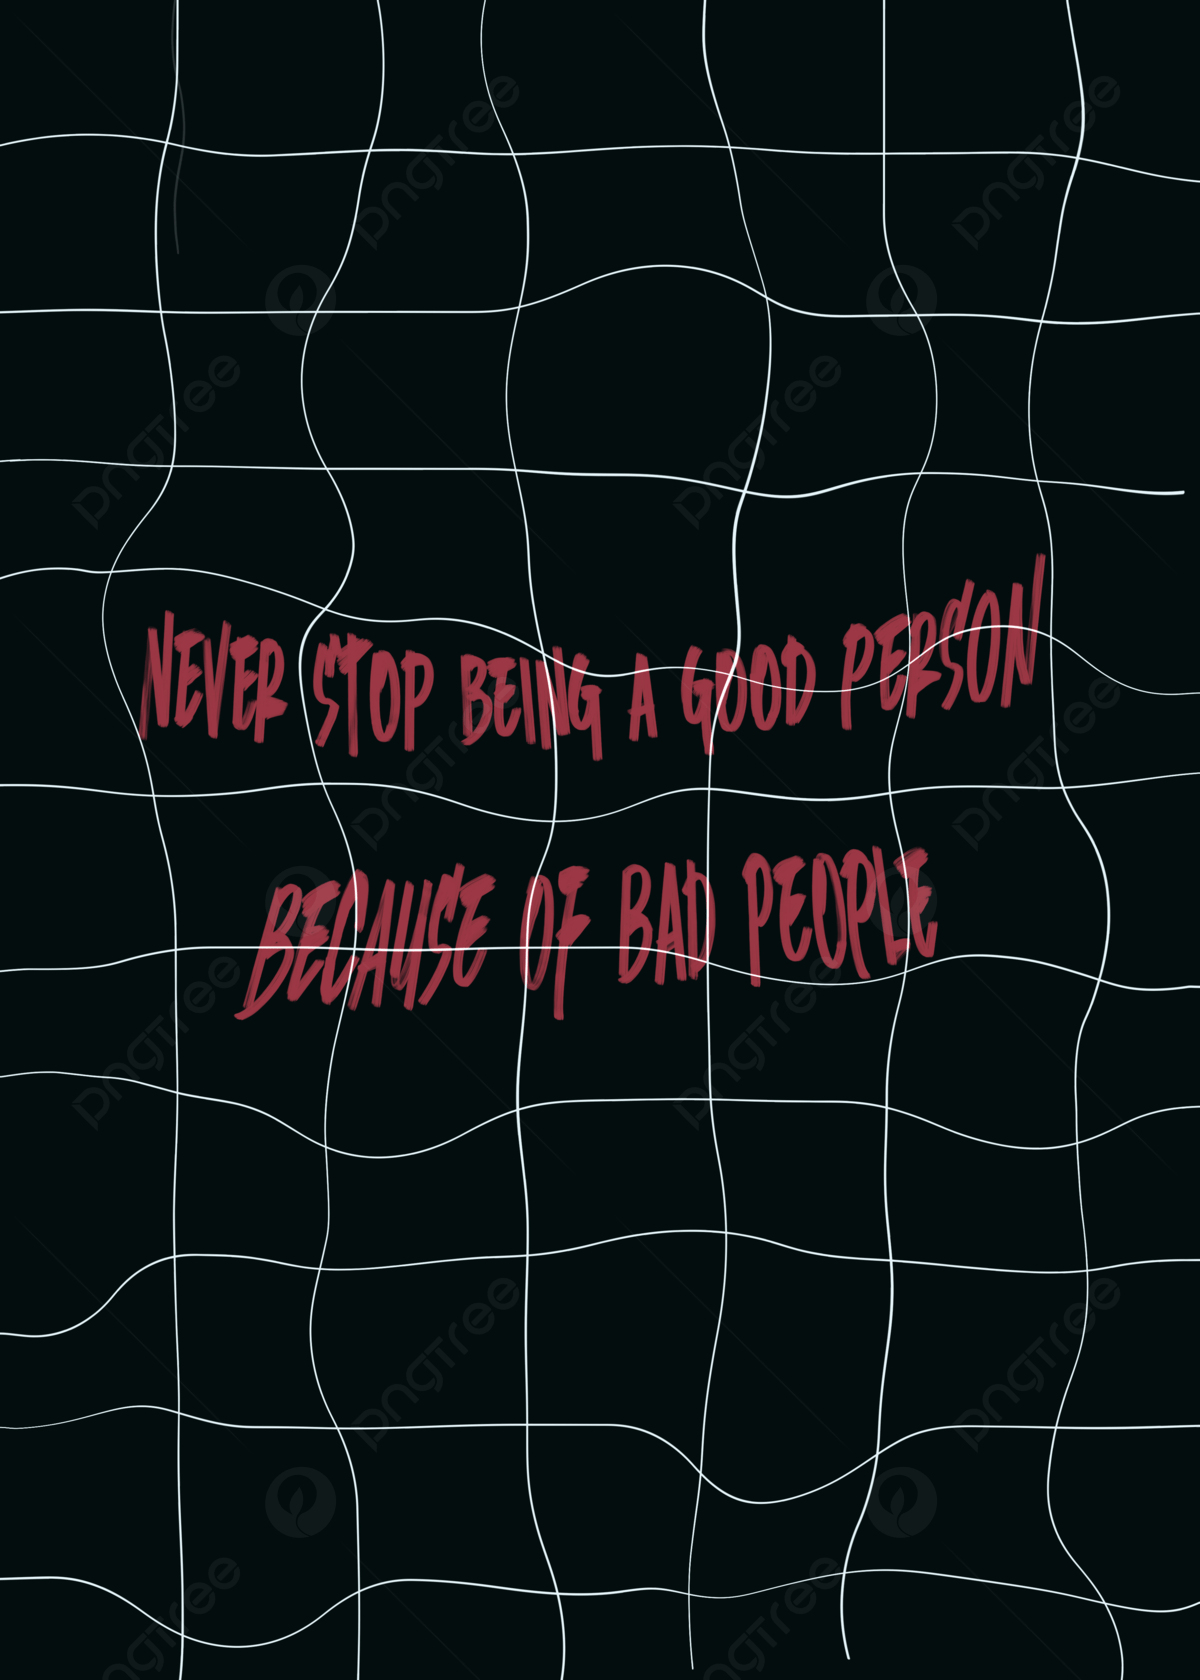 Never stop being a good person because of bad people. - Black quotes, graffiti